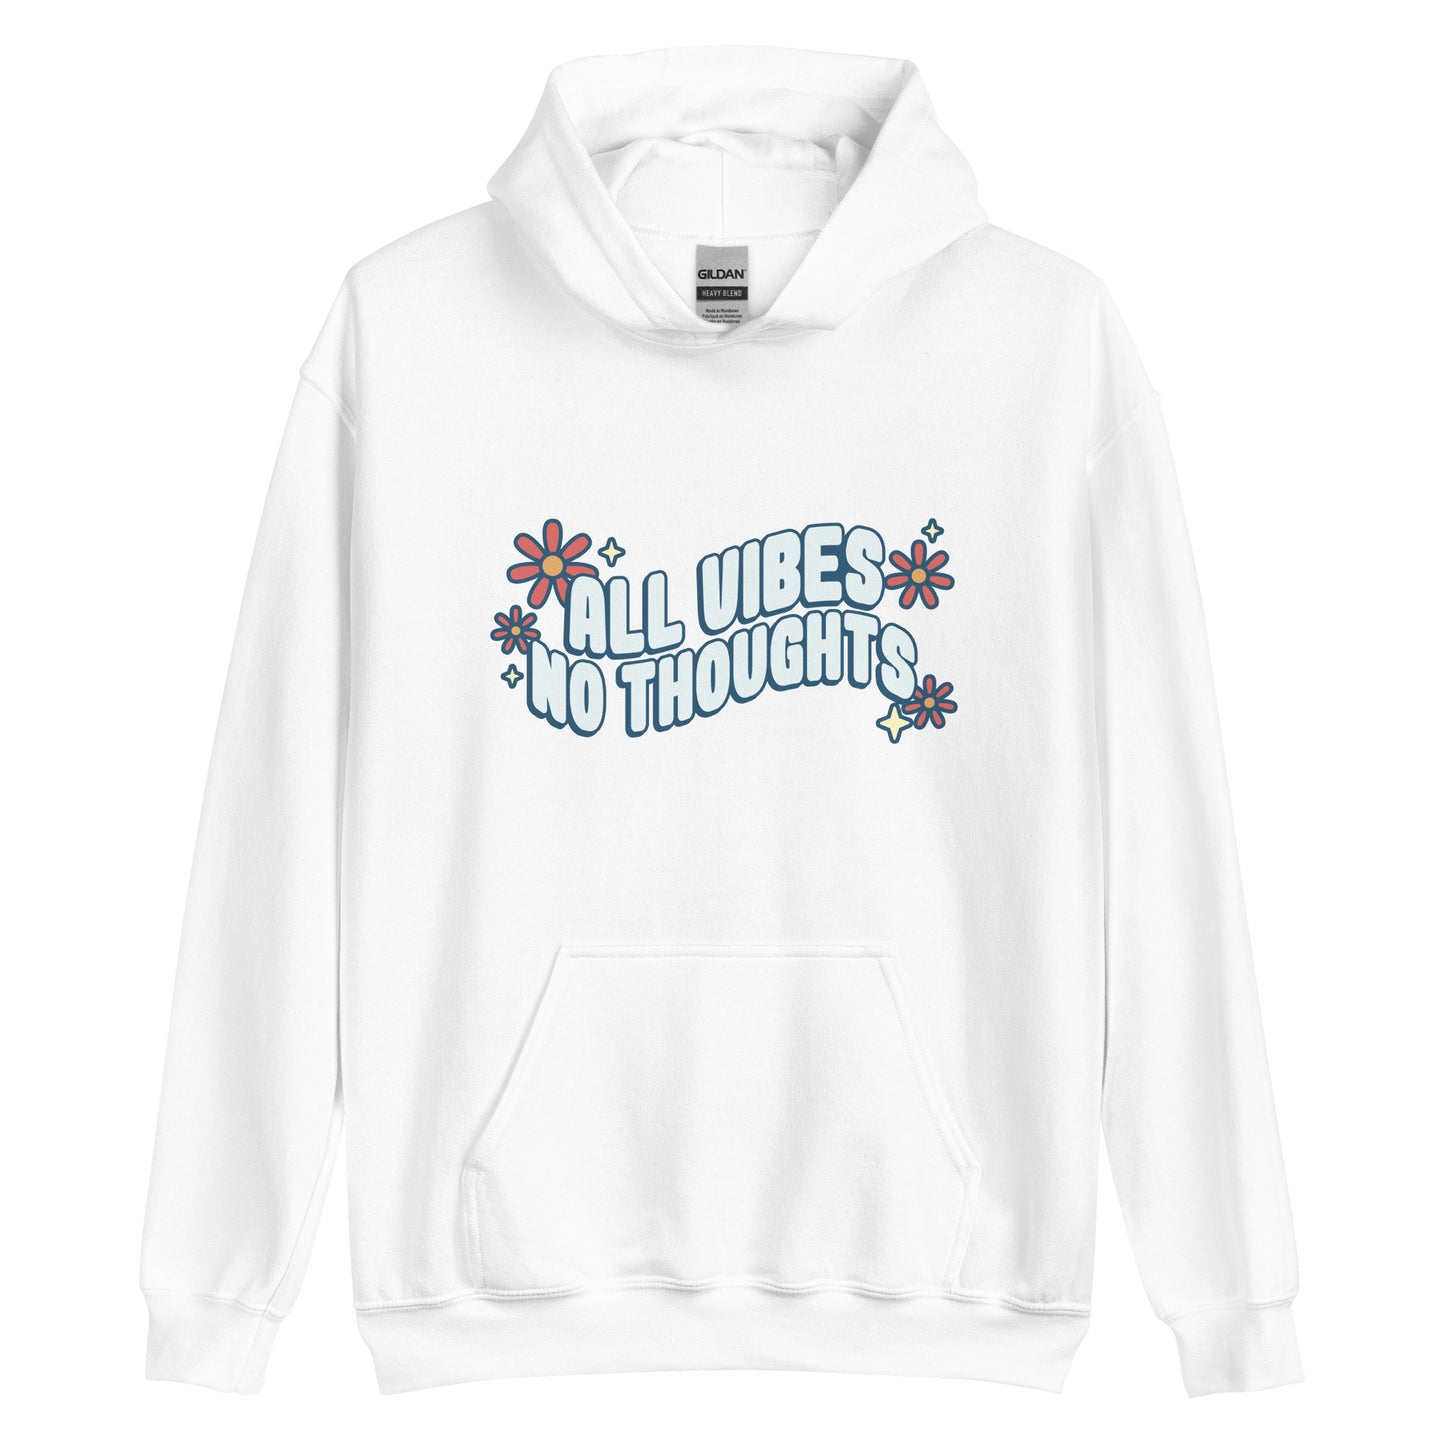 A white hooded sweatshirt featuring text that reads "All vibes, no thoughts". Around the text are a few pink flowers and pale yellow sparkles.